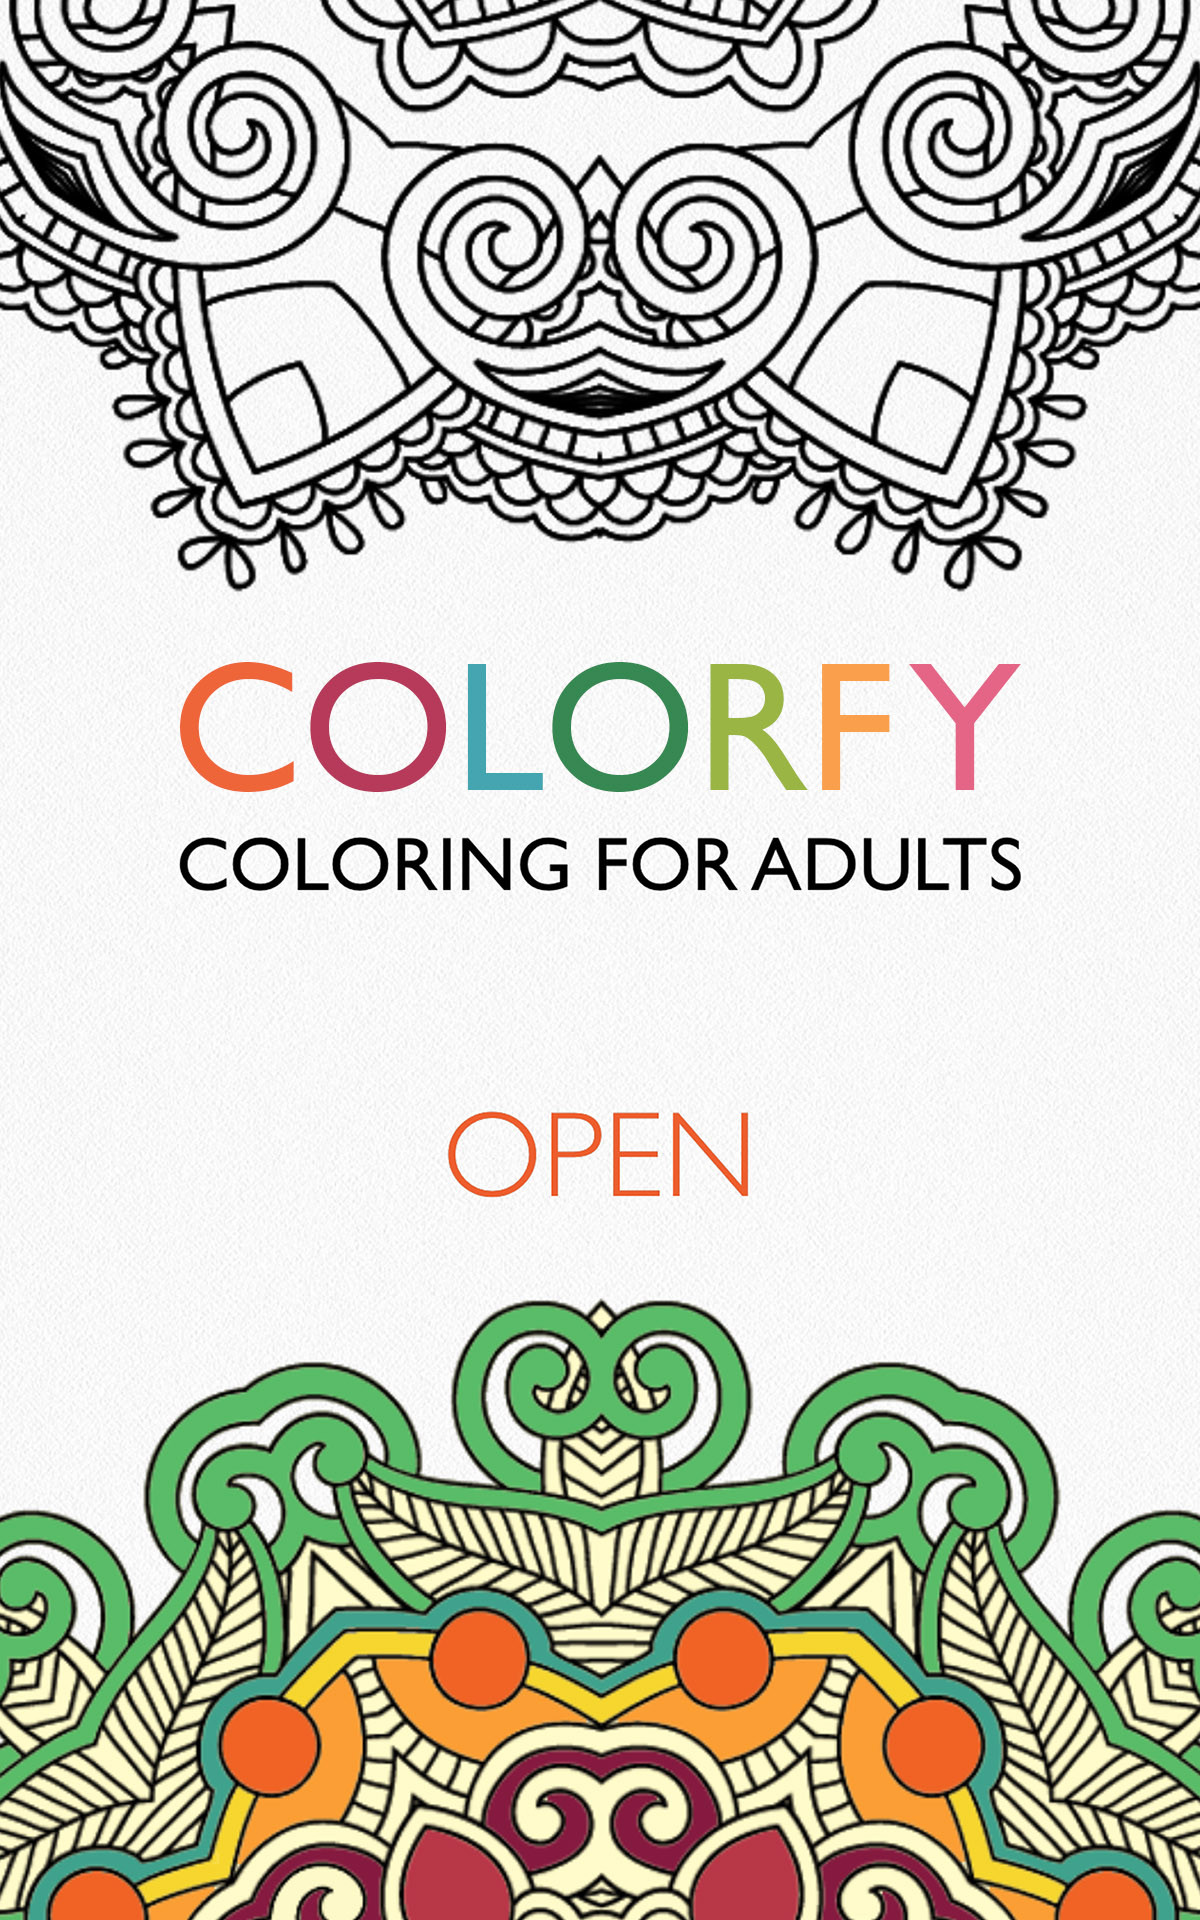 Colorfy Coloring Pages For Adults